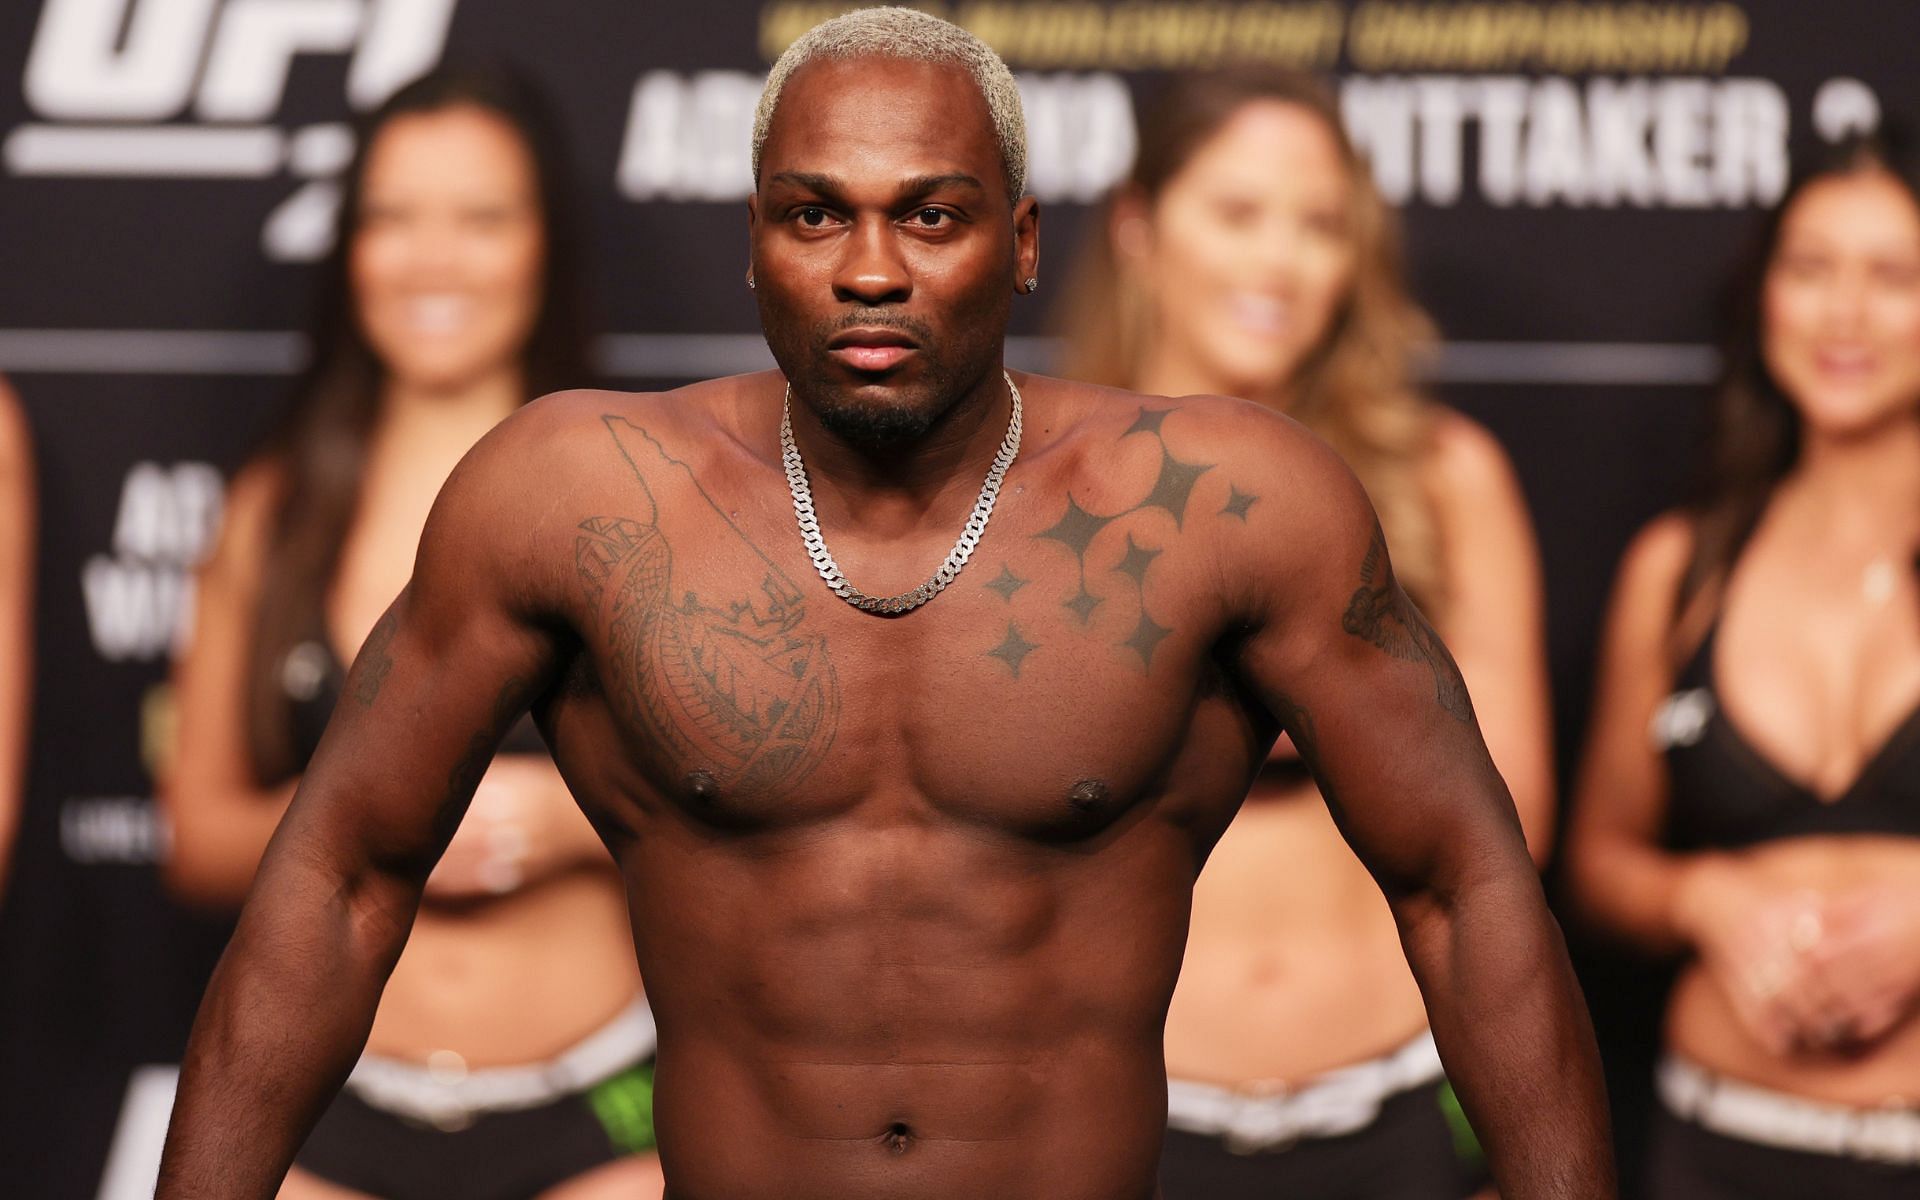 UFC middleweight Derek Brunson plans to be ready to fight by the end of